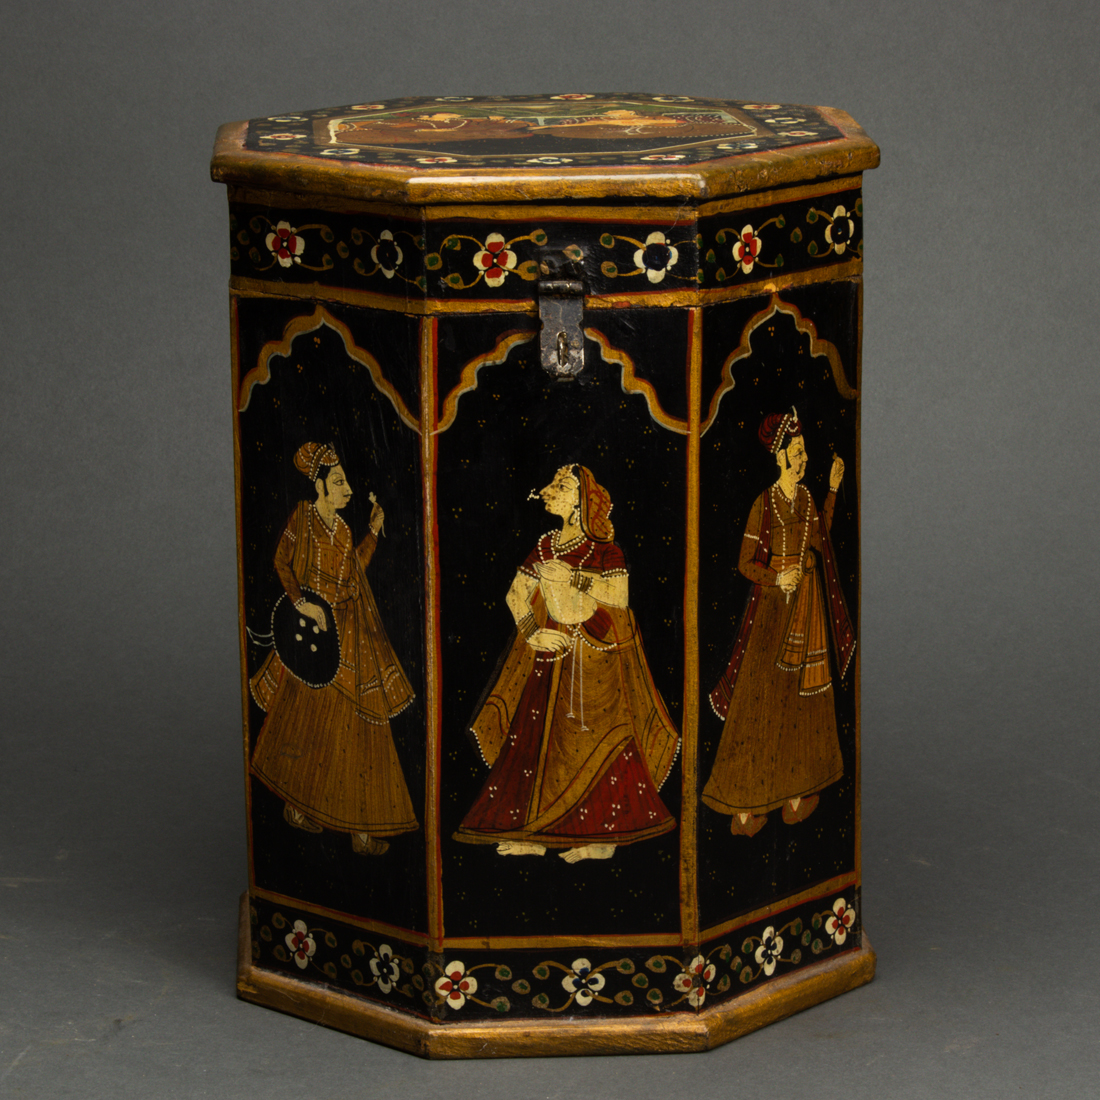 SOUTH ASIAN OCTAGONAL BOX WITH 3a1f3a